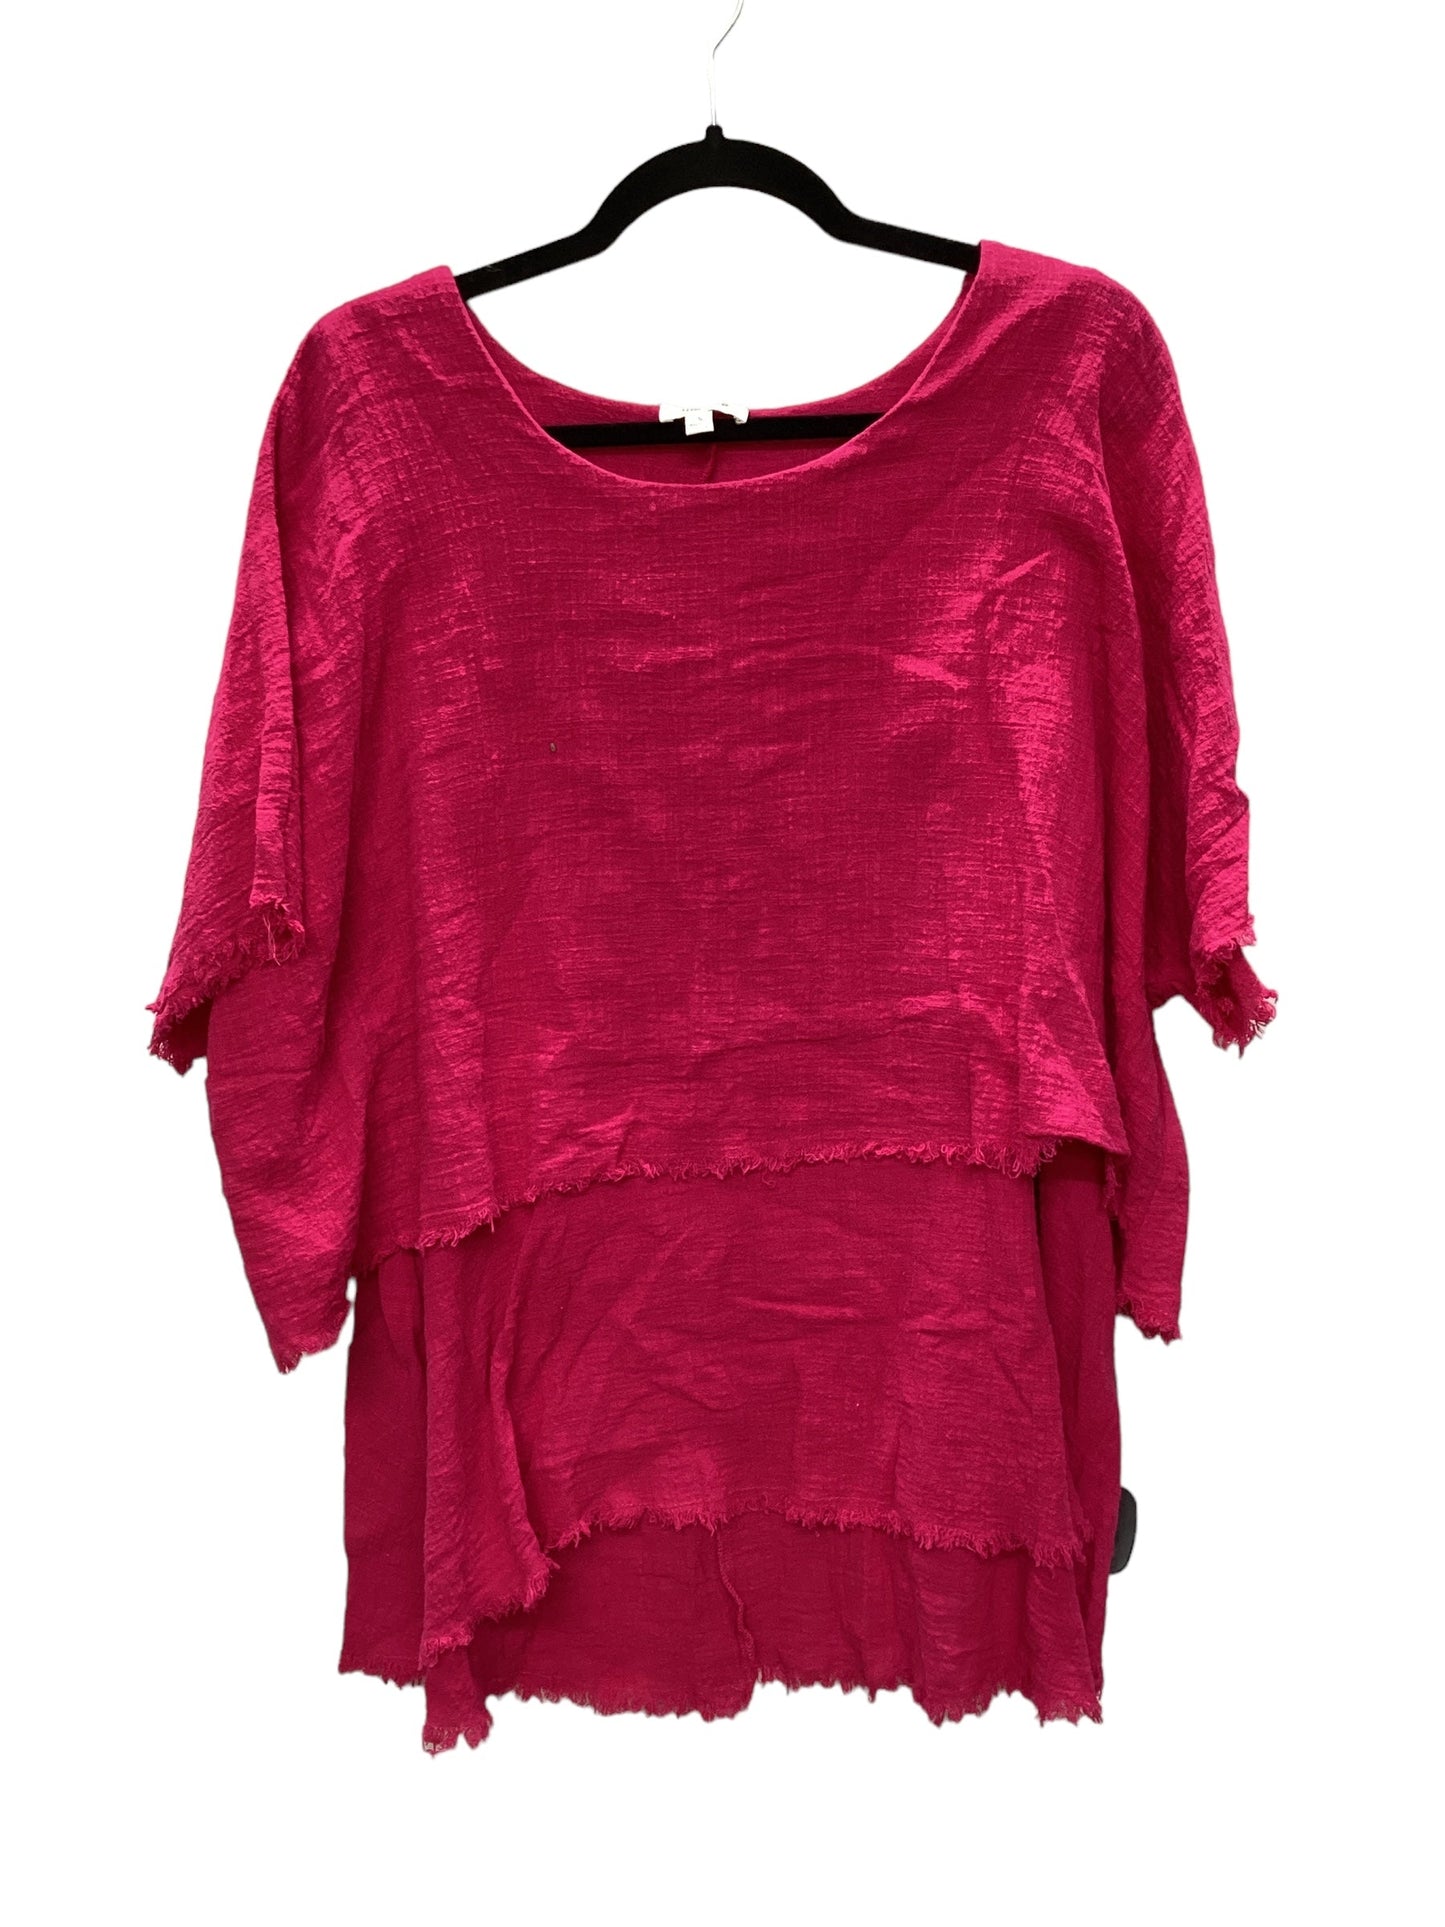 Pink Top Short Sleeve Umgee, Size S